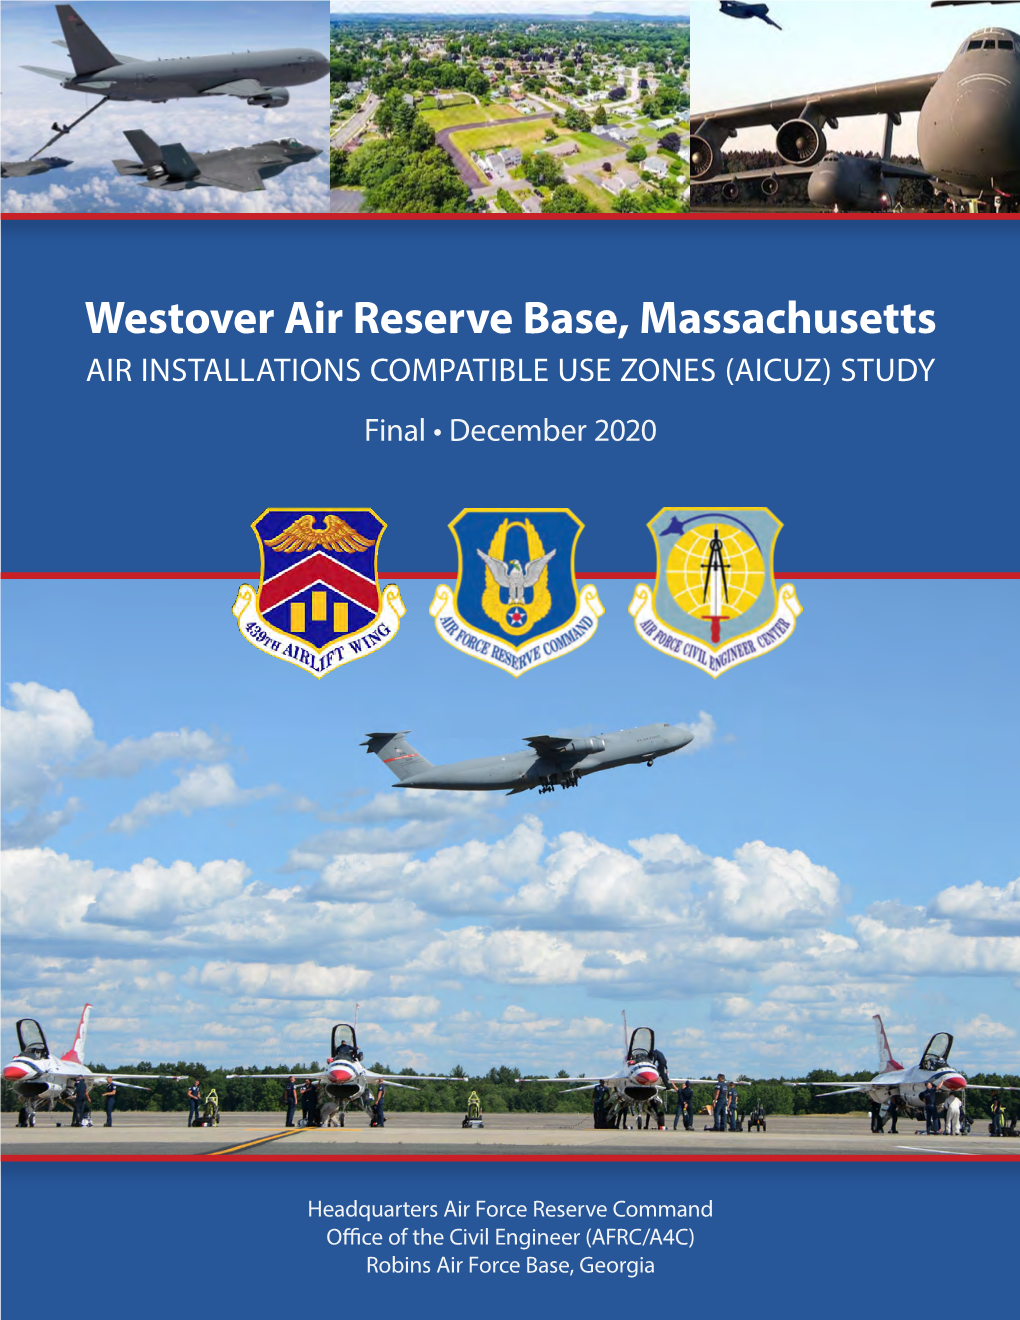 Westover Air Reserve Base, Massachusetts AIR INSTALLATIONS COMPATIBLE USE ZONES (AICUZ) STUDY Final • December 2020